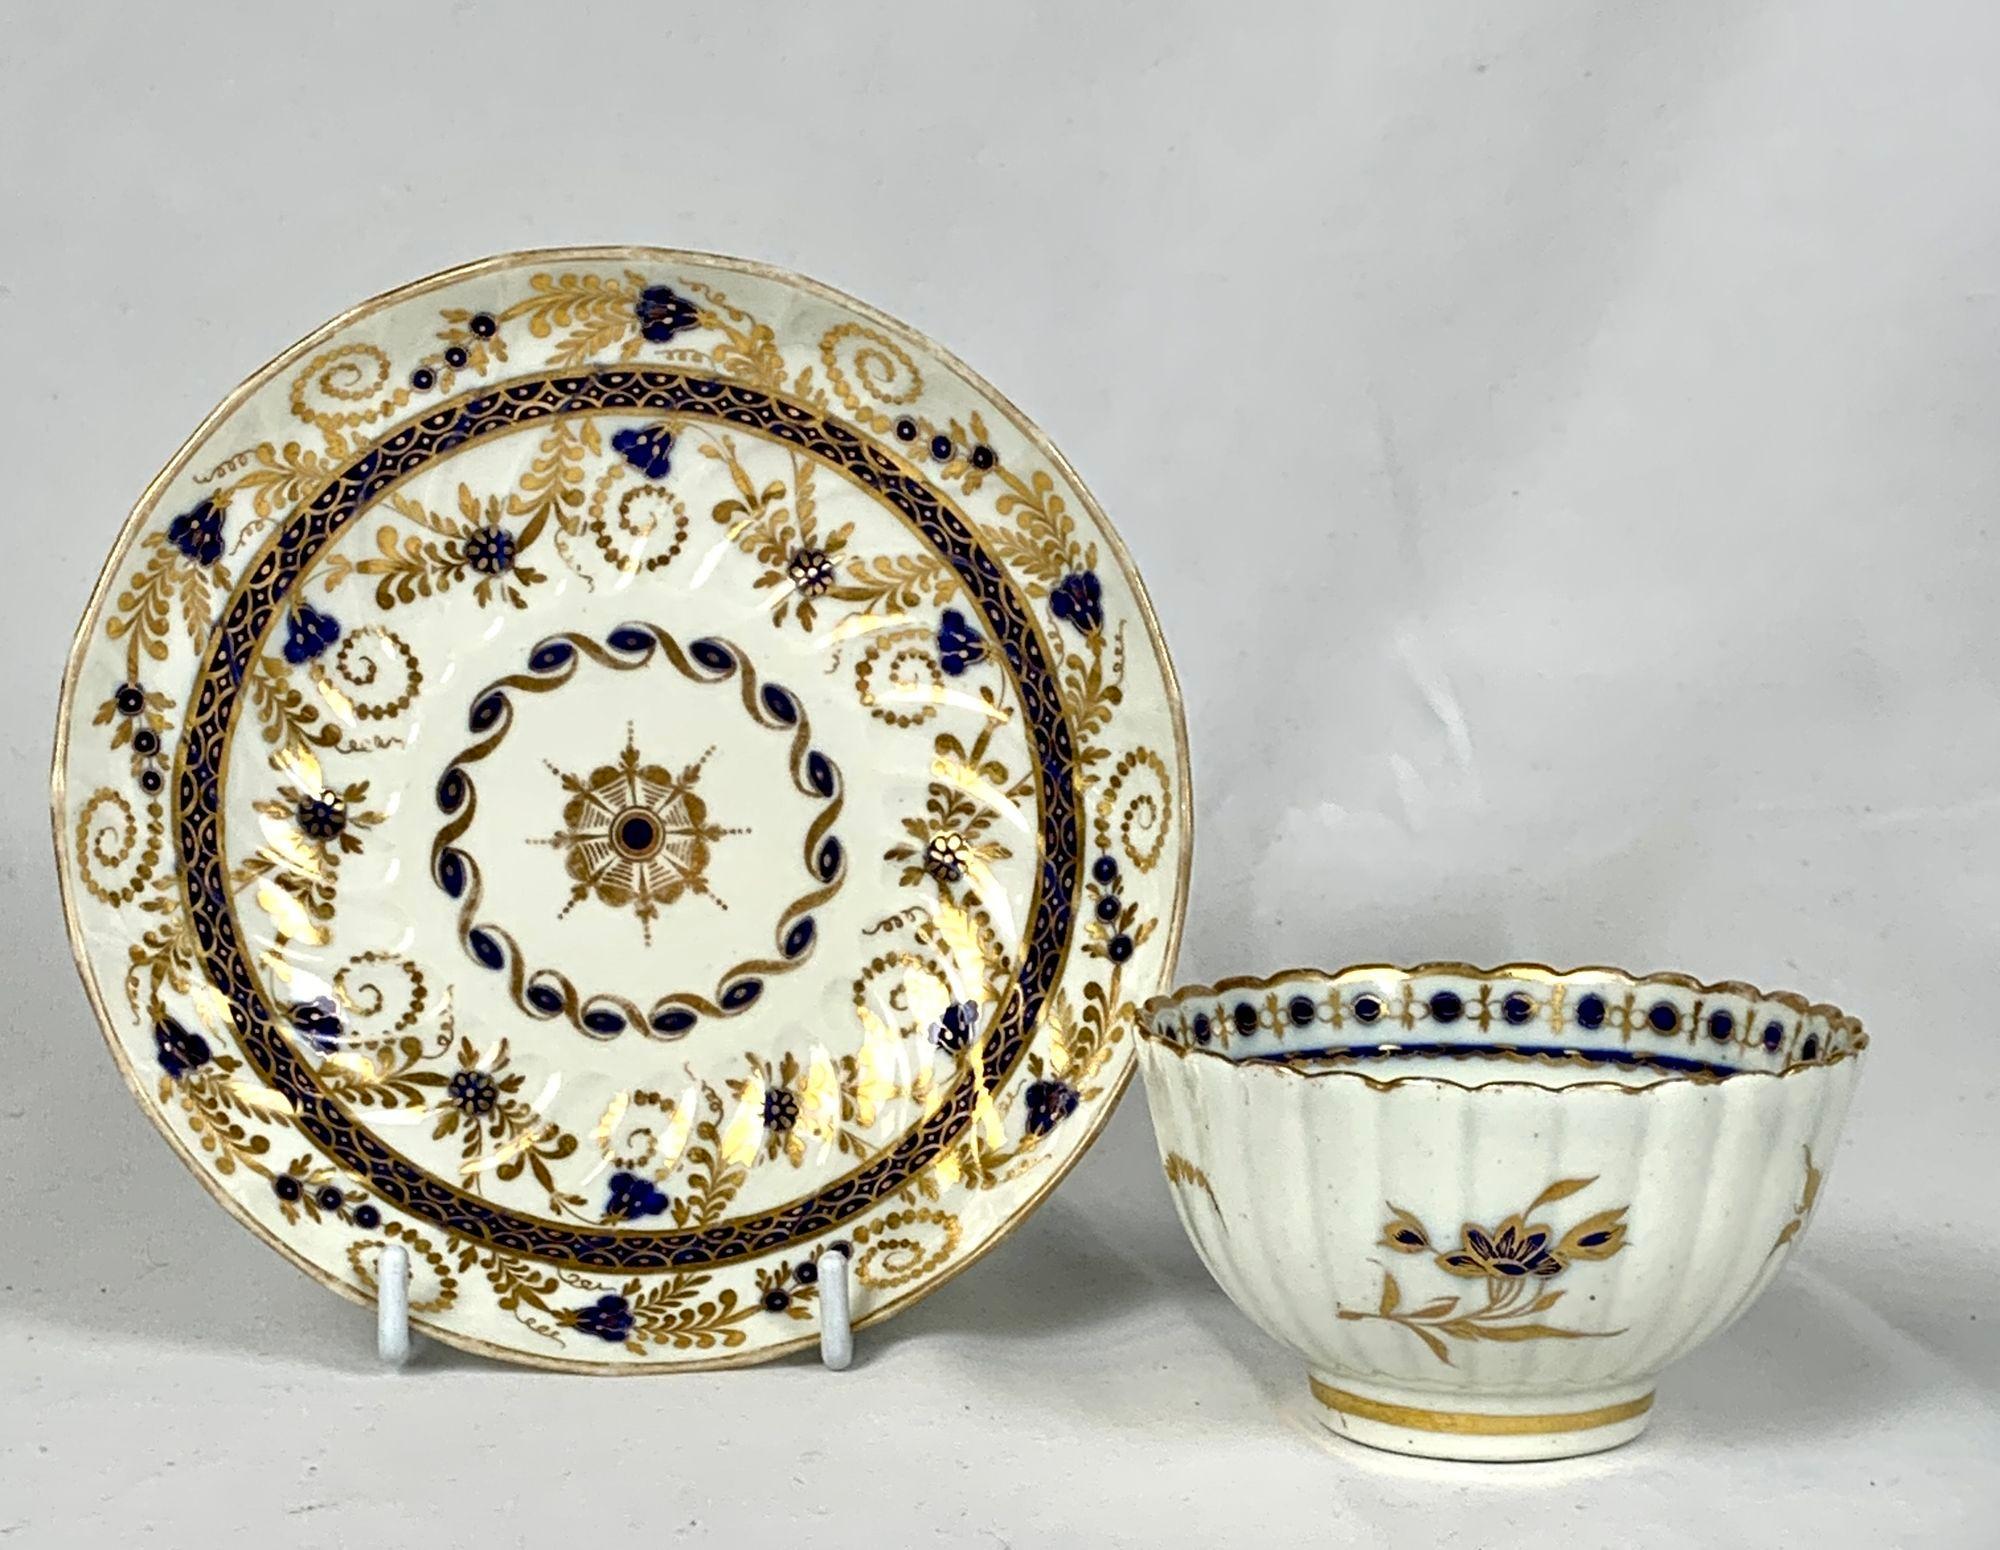 This lovely 18th-century porcelain tea bowl and saucer were made by Caughley Porcelain in England circa 1785.
The style is neoclassical: both the cup and saucer show a gilded star at the center and rings of decoration, combining deep blue enamel and